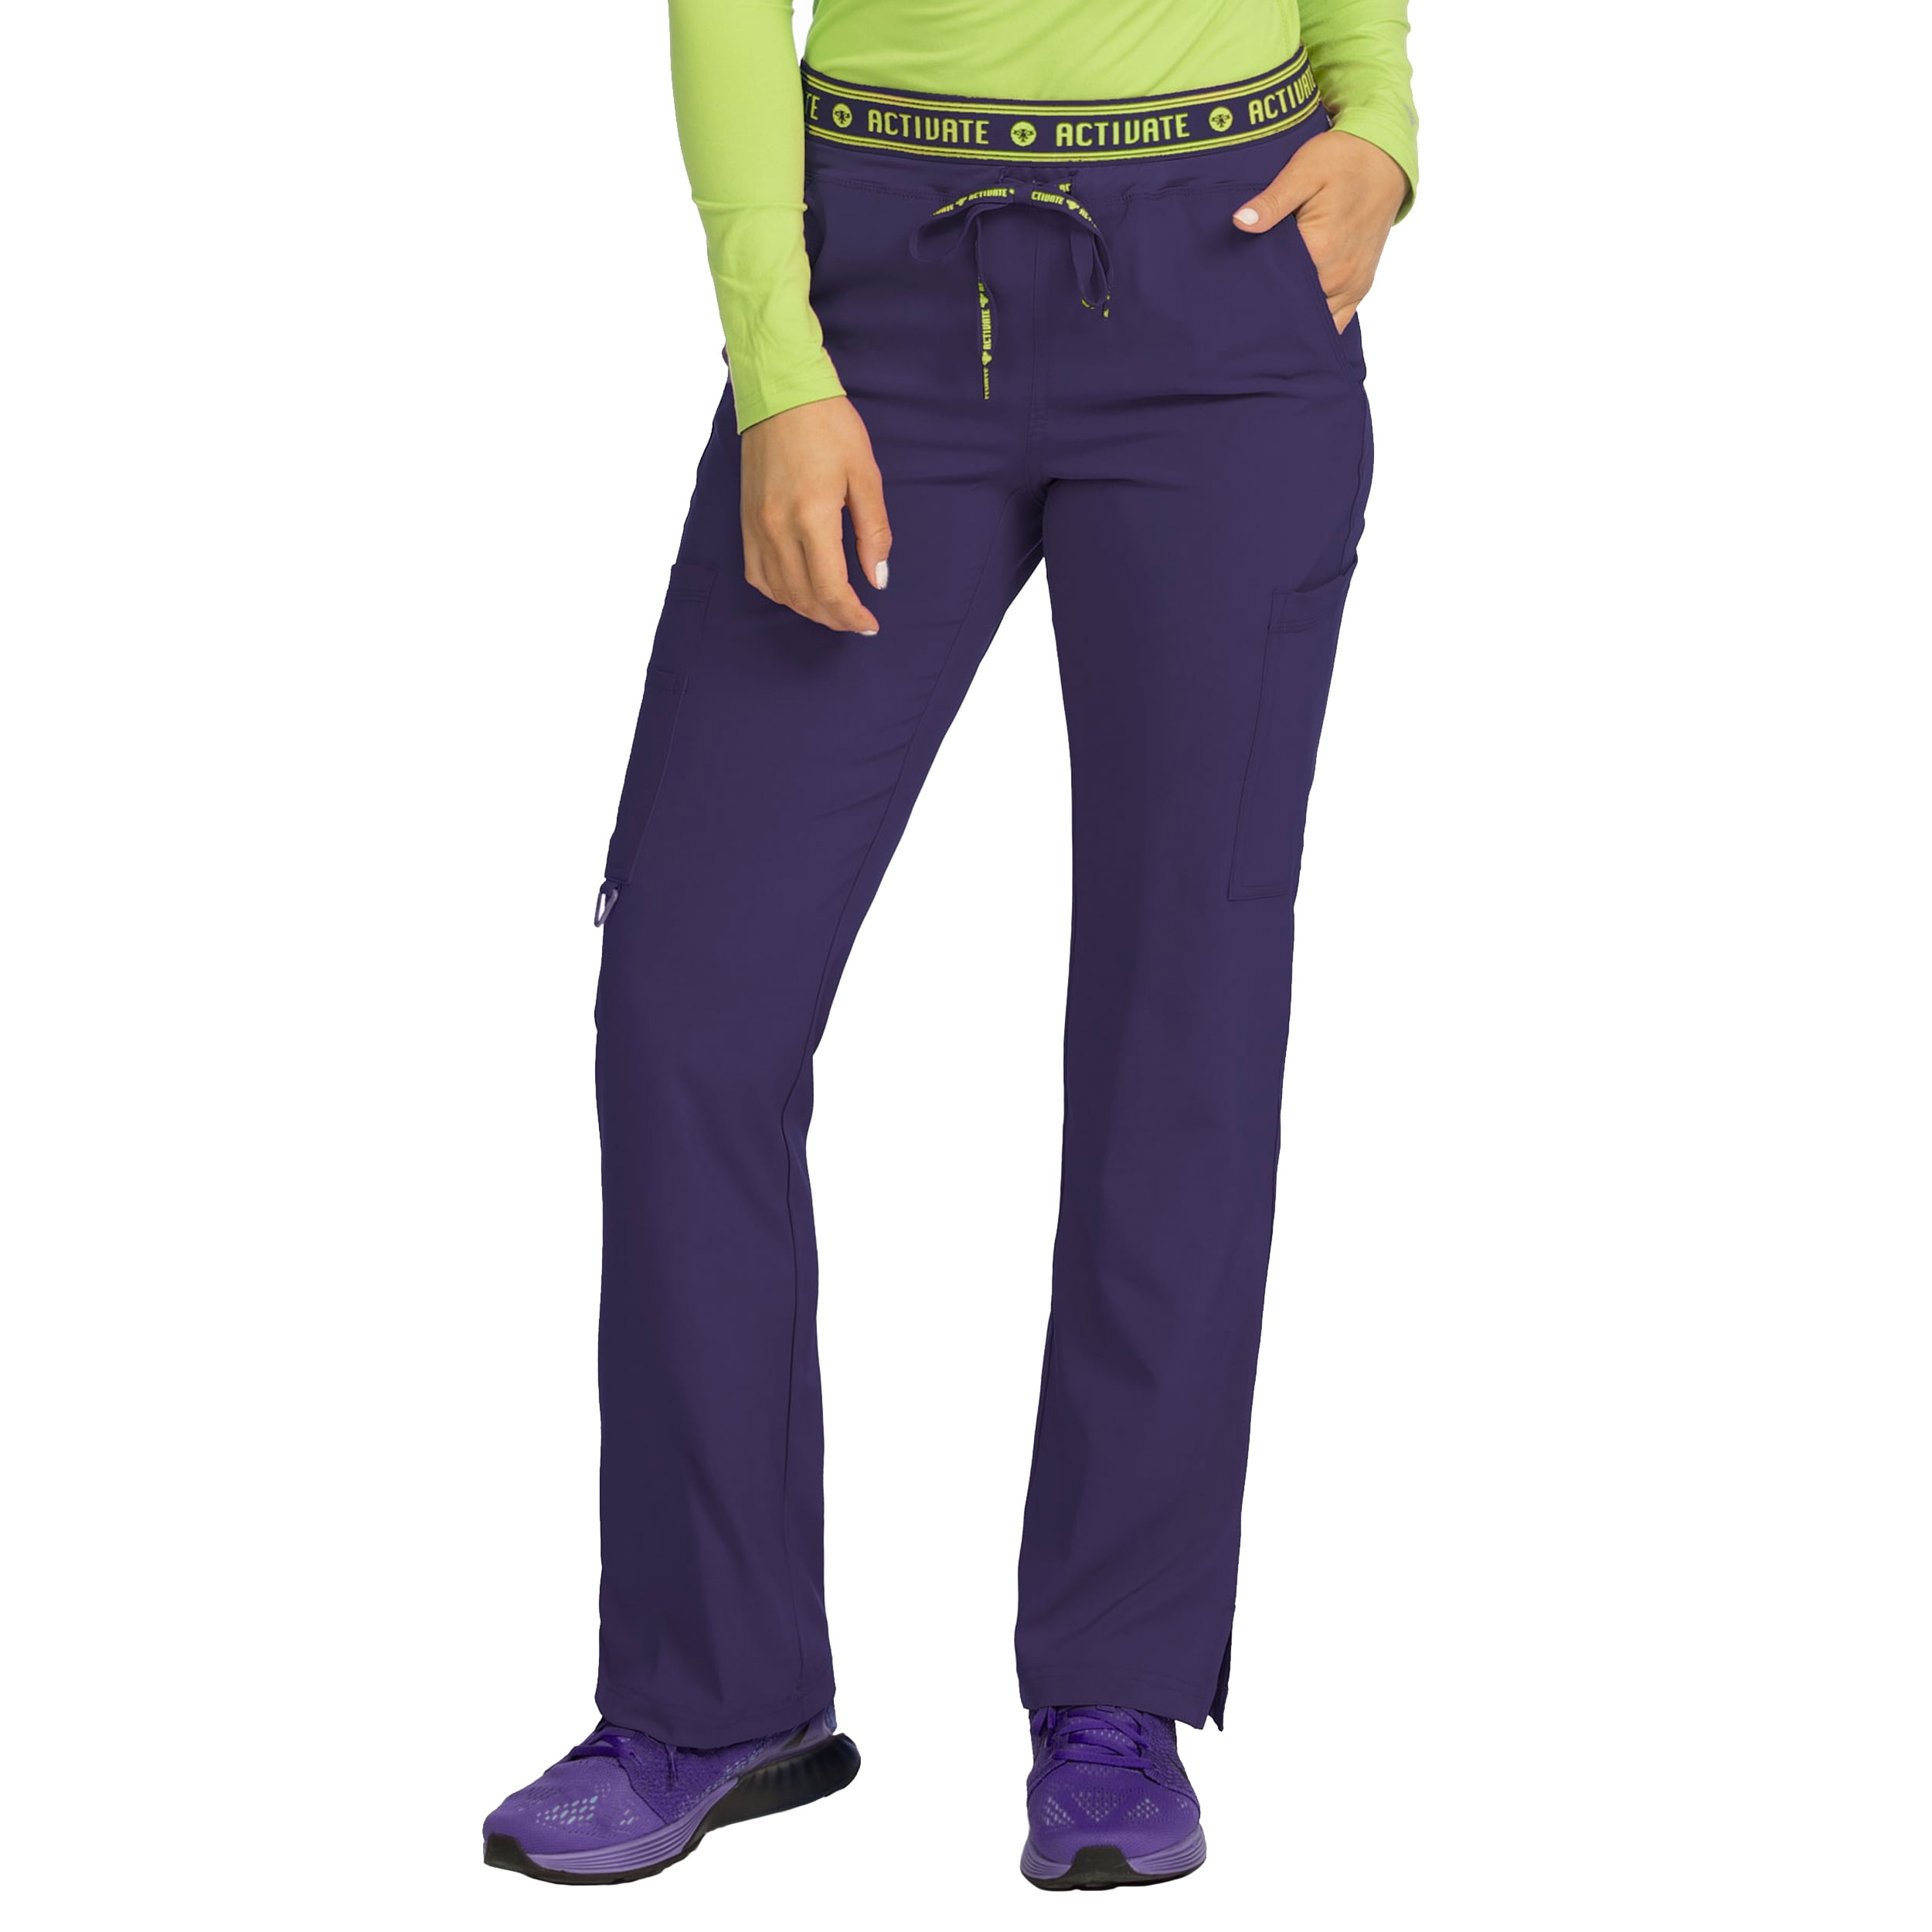 Yoga 2 Cargo Pocket Pant - Touch - Med Couture - Brands - Metro